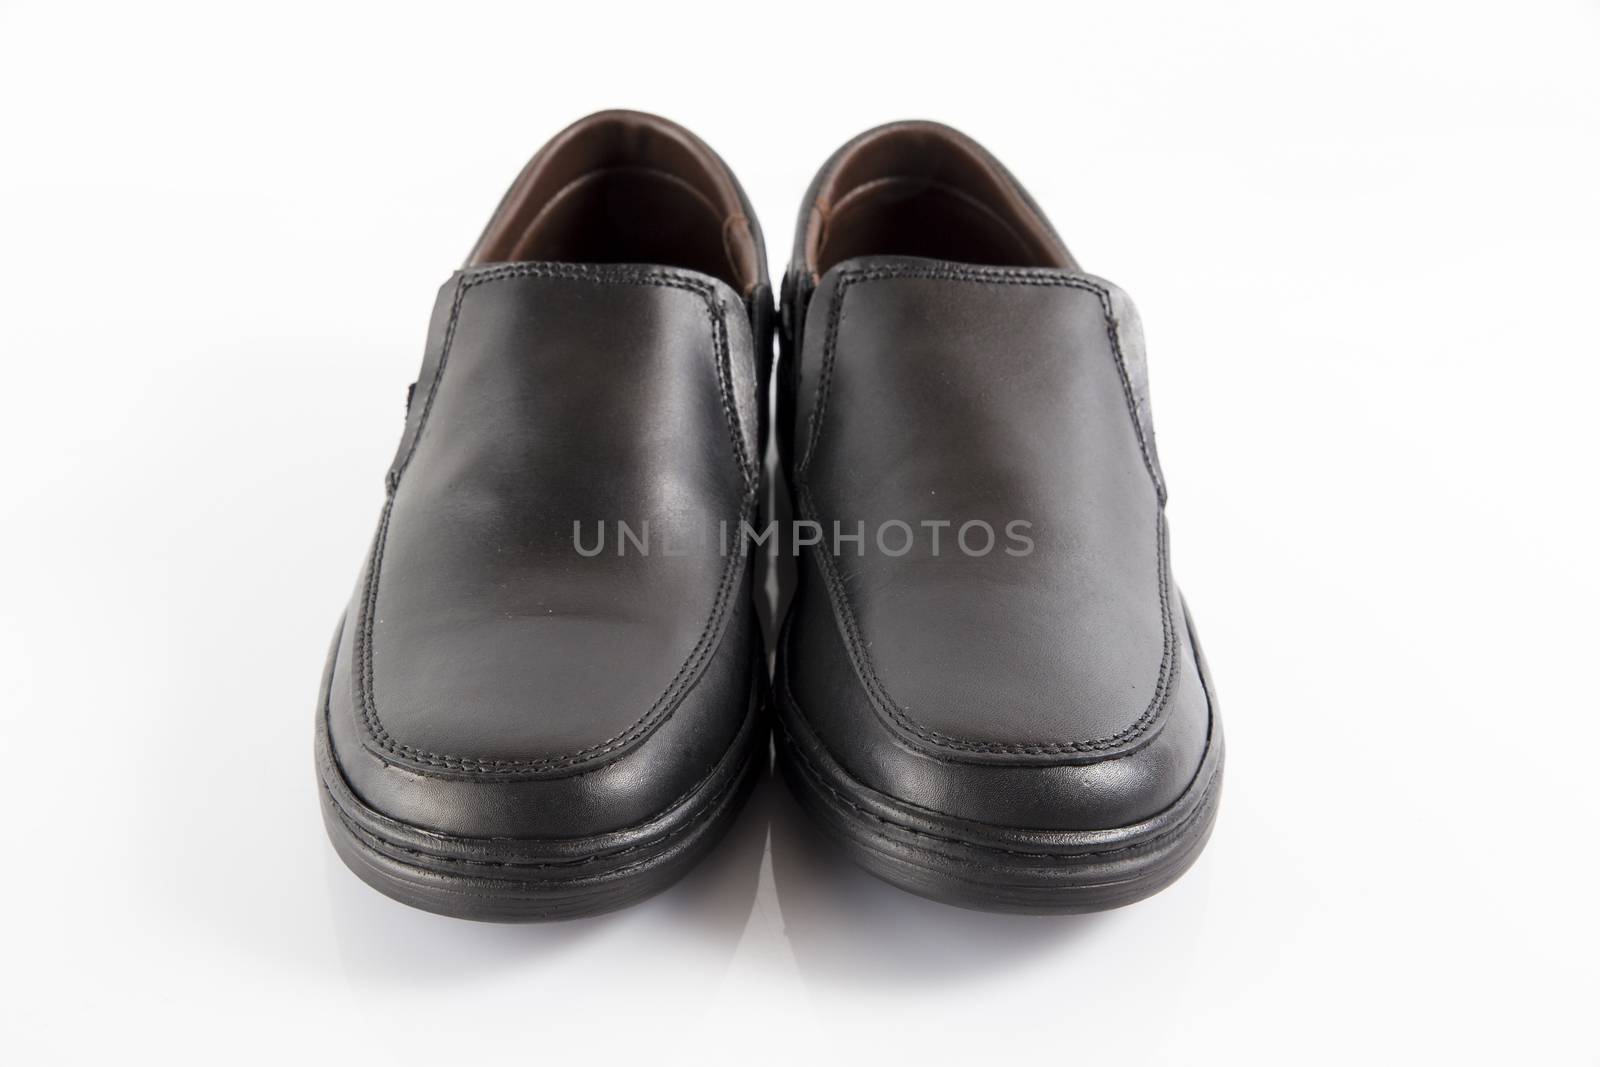 Male black leather shoes on white background, isolated product.